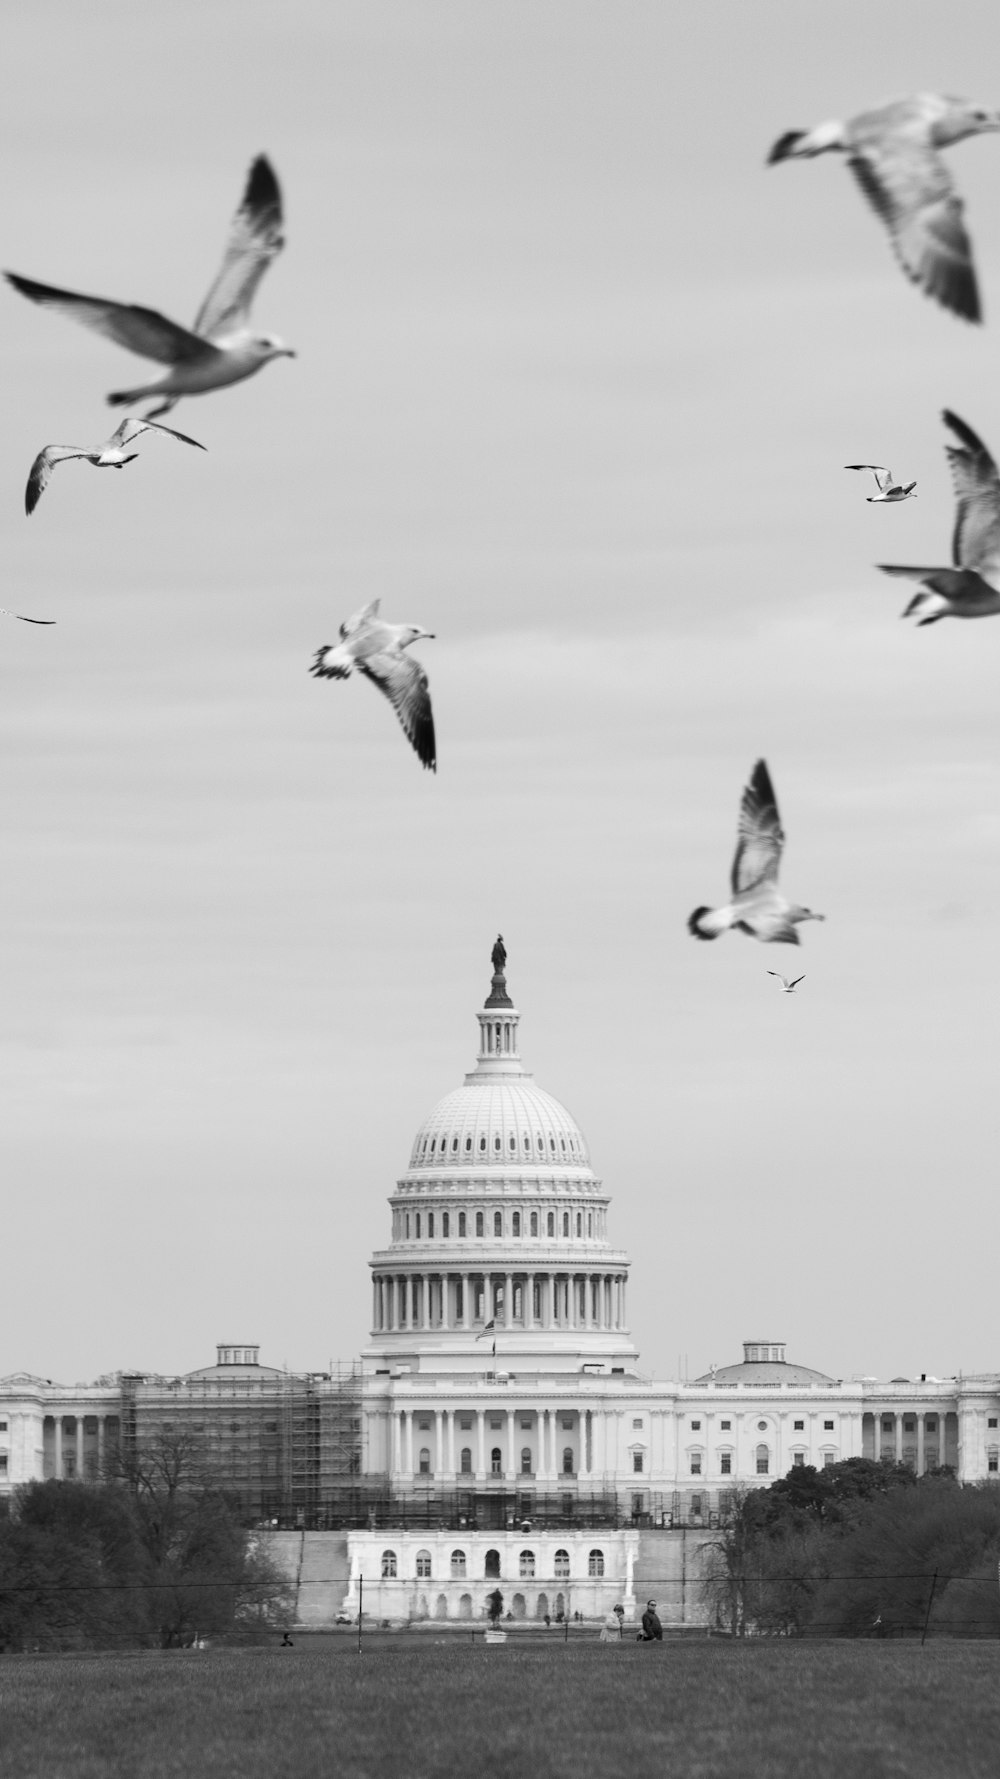 a flock of birds flying over the capitol building